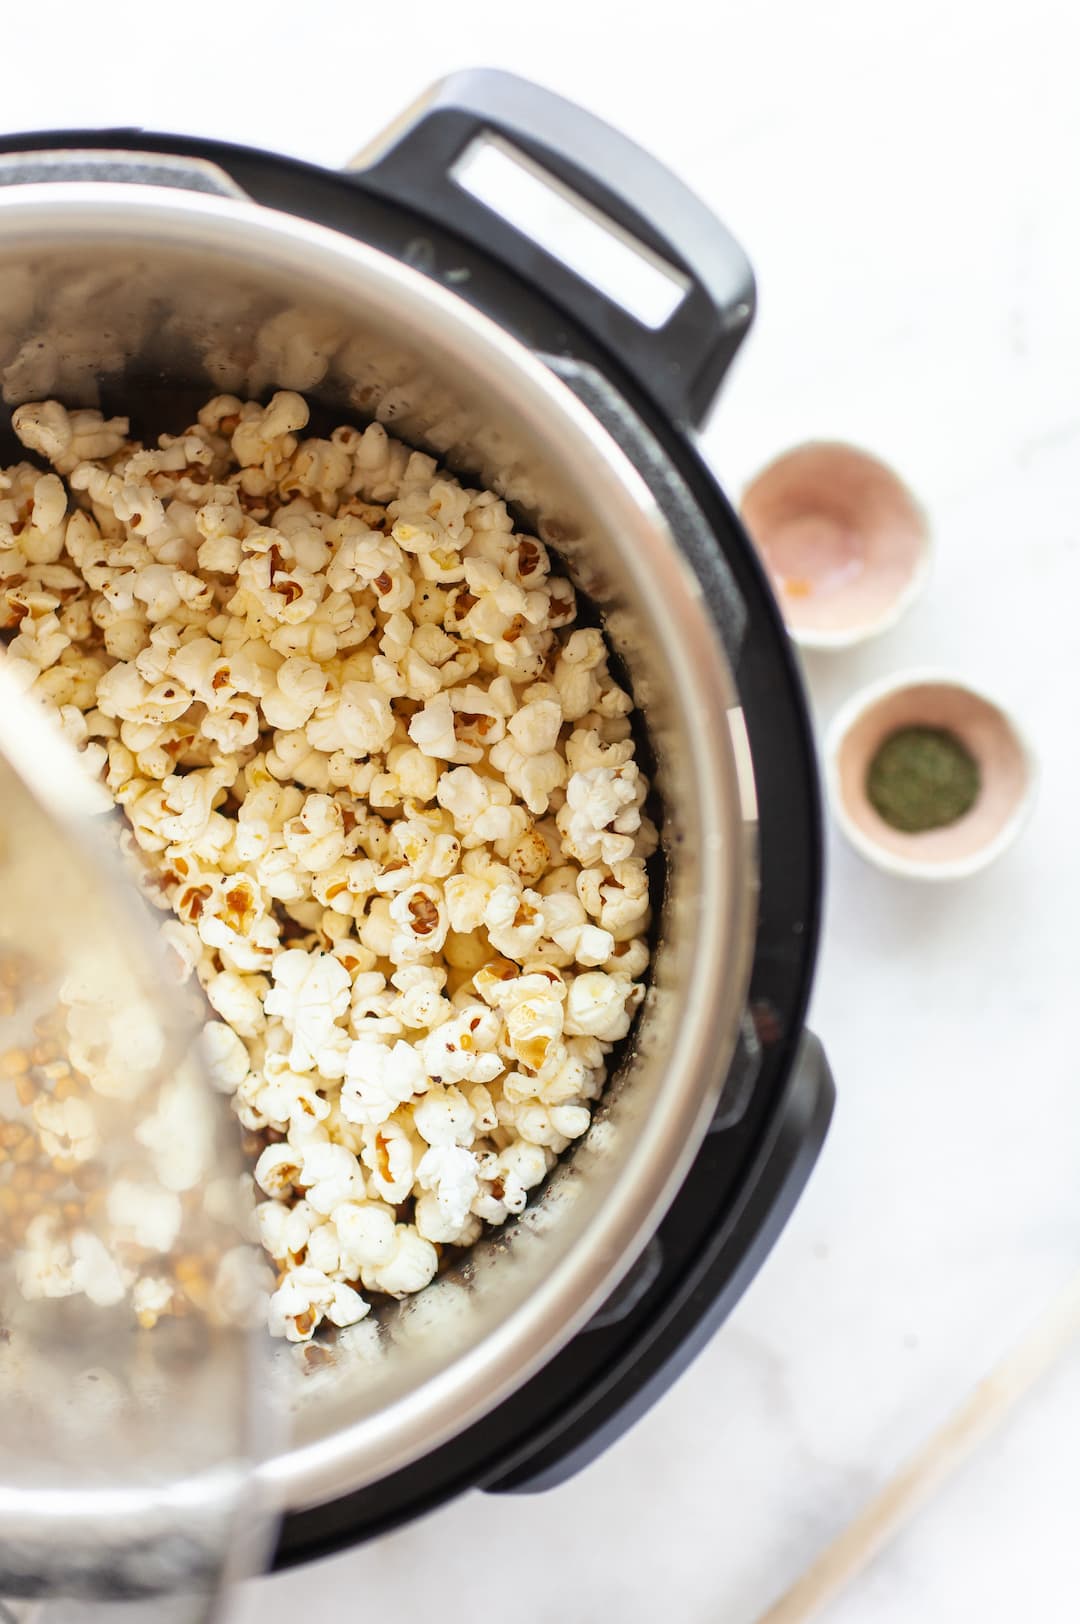 Popped popcorn in an instant pot